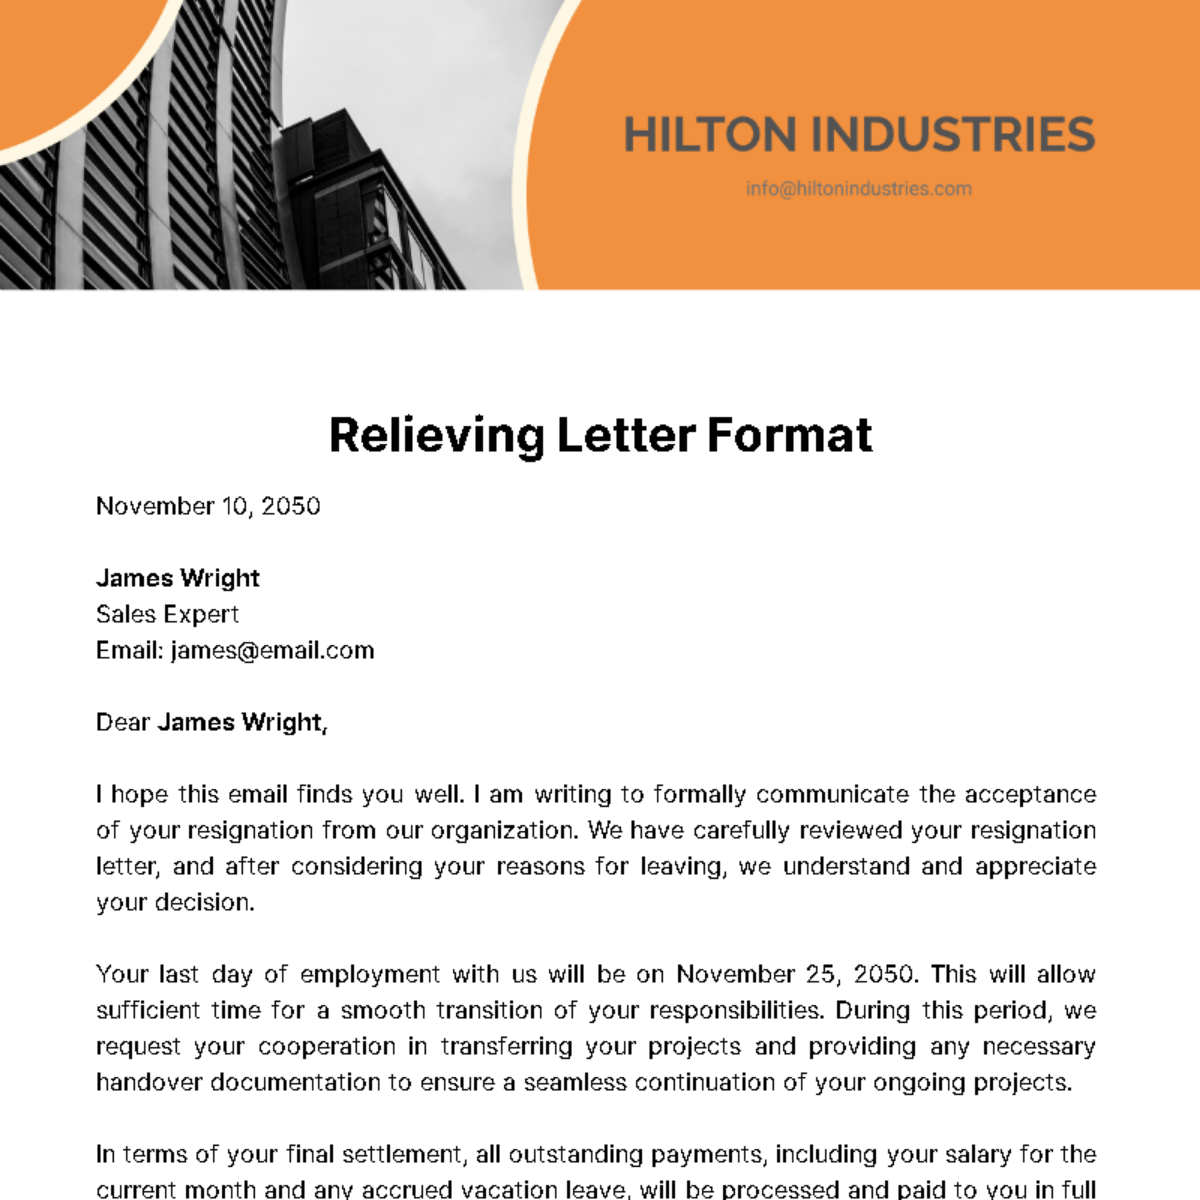 Relieving Letter Format Template